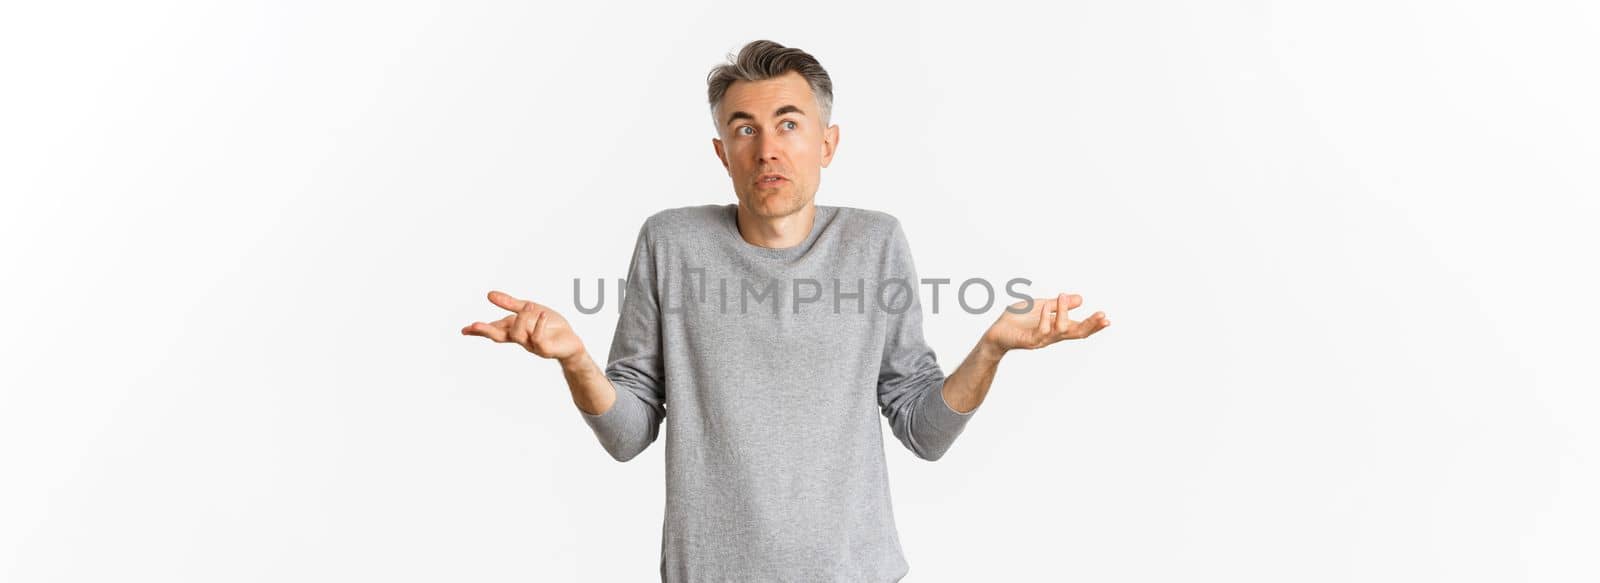 Image of confused middle-aged man with grey hair, shrugging and looking away, cannot understand something, standing over white background.